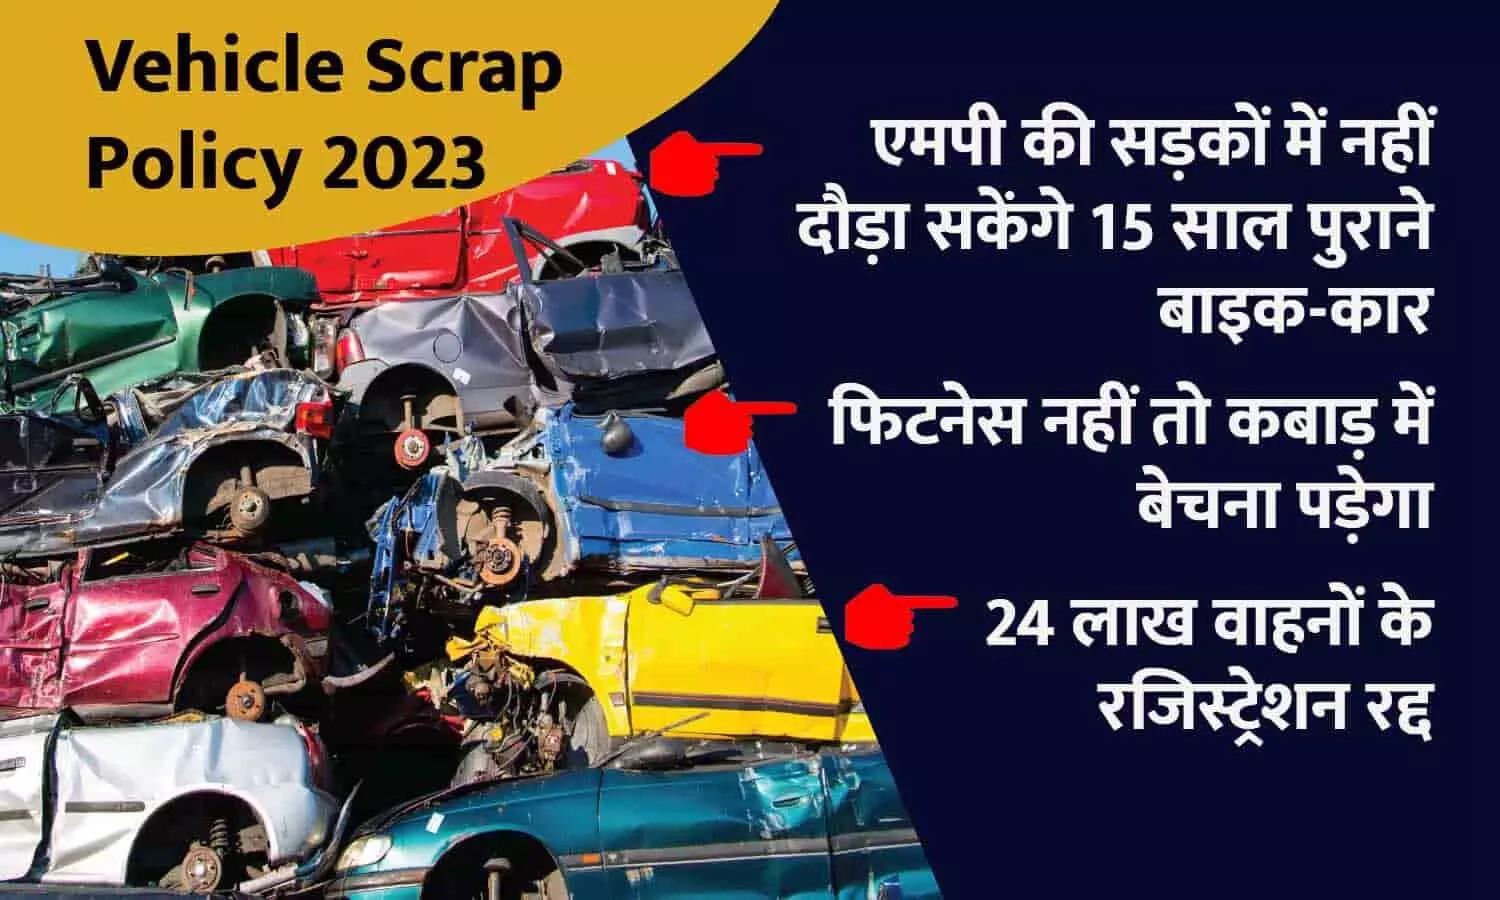 Vehicle Scrap Policy 2023